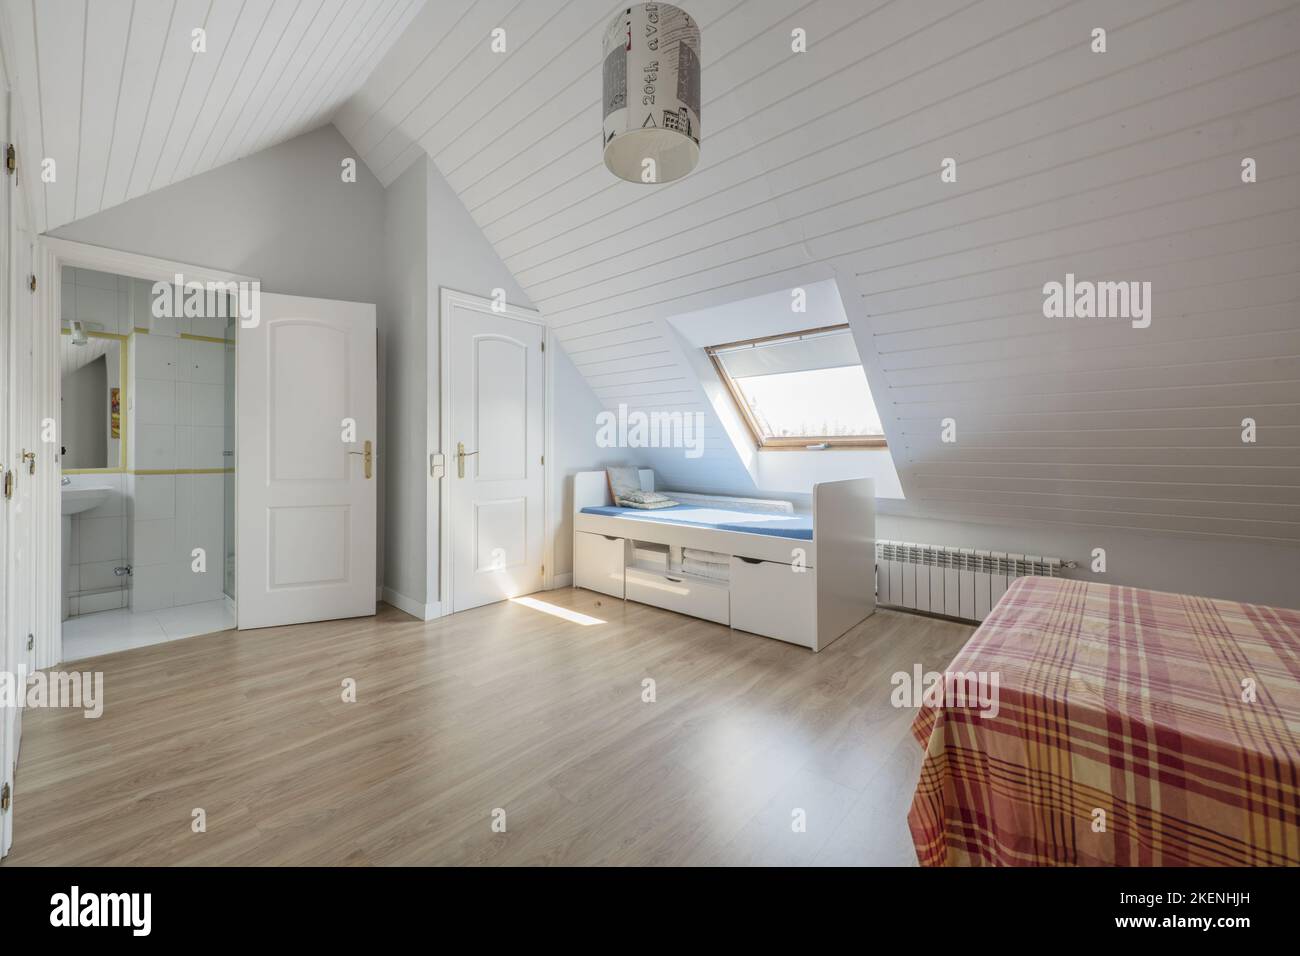 Bedroom with white cabinet doors, bed with striped bedspread, sloping ceilings and youthful bed with drawers, skylight in the ceiling and en-suite toi Stock Photo